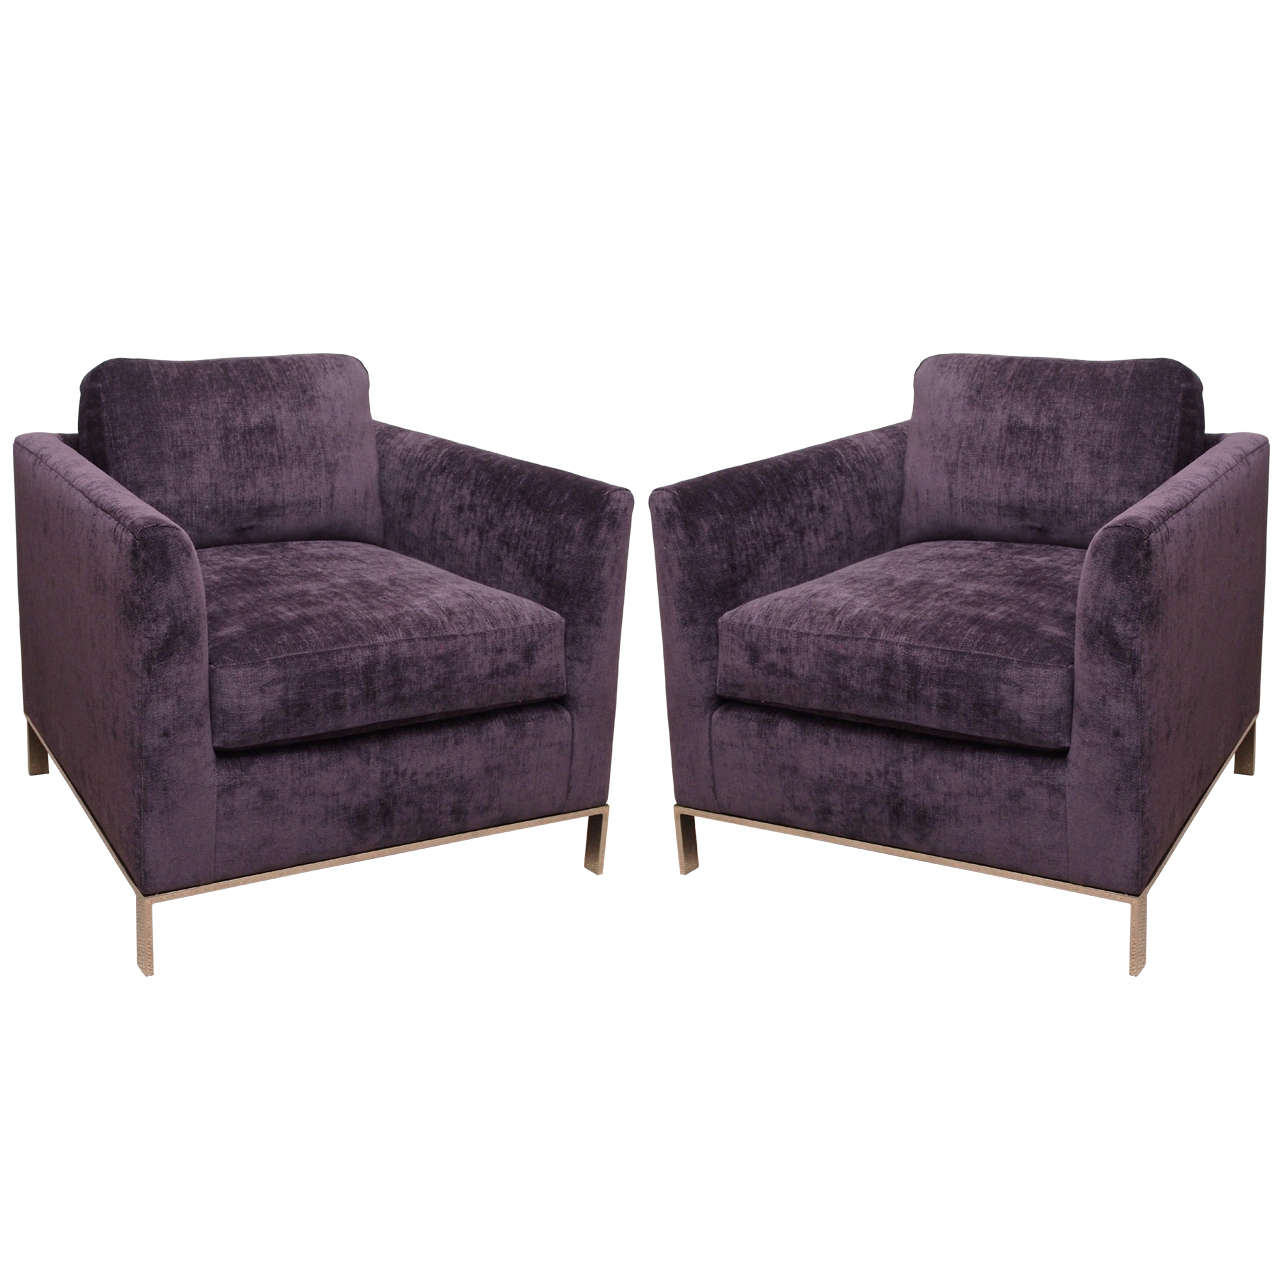 Pair of Vintage Lounge Chairs by Michael Weiss for Vanguard